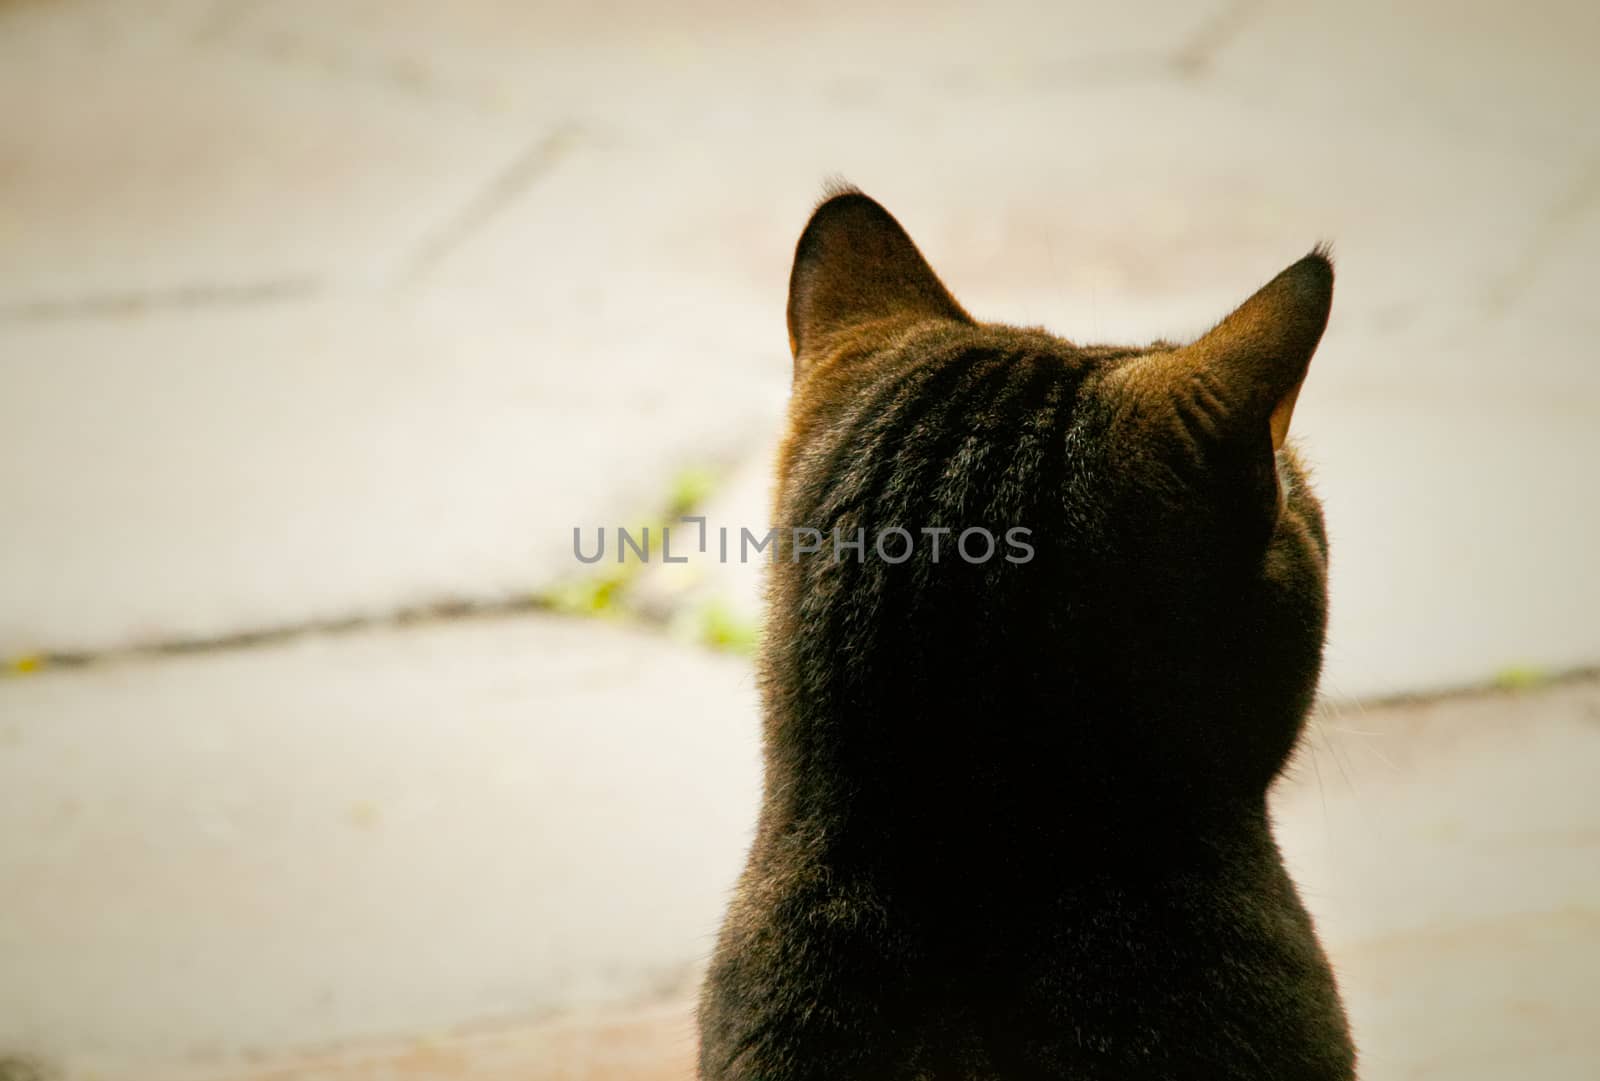 back of cat staring into the distance by stockbp